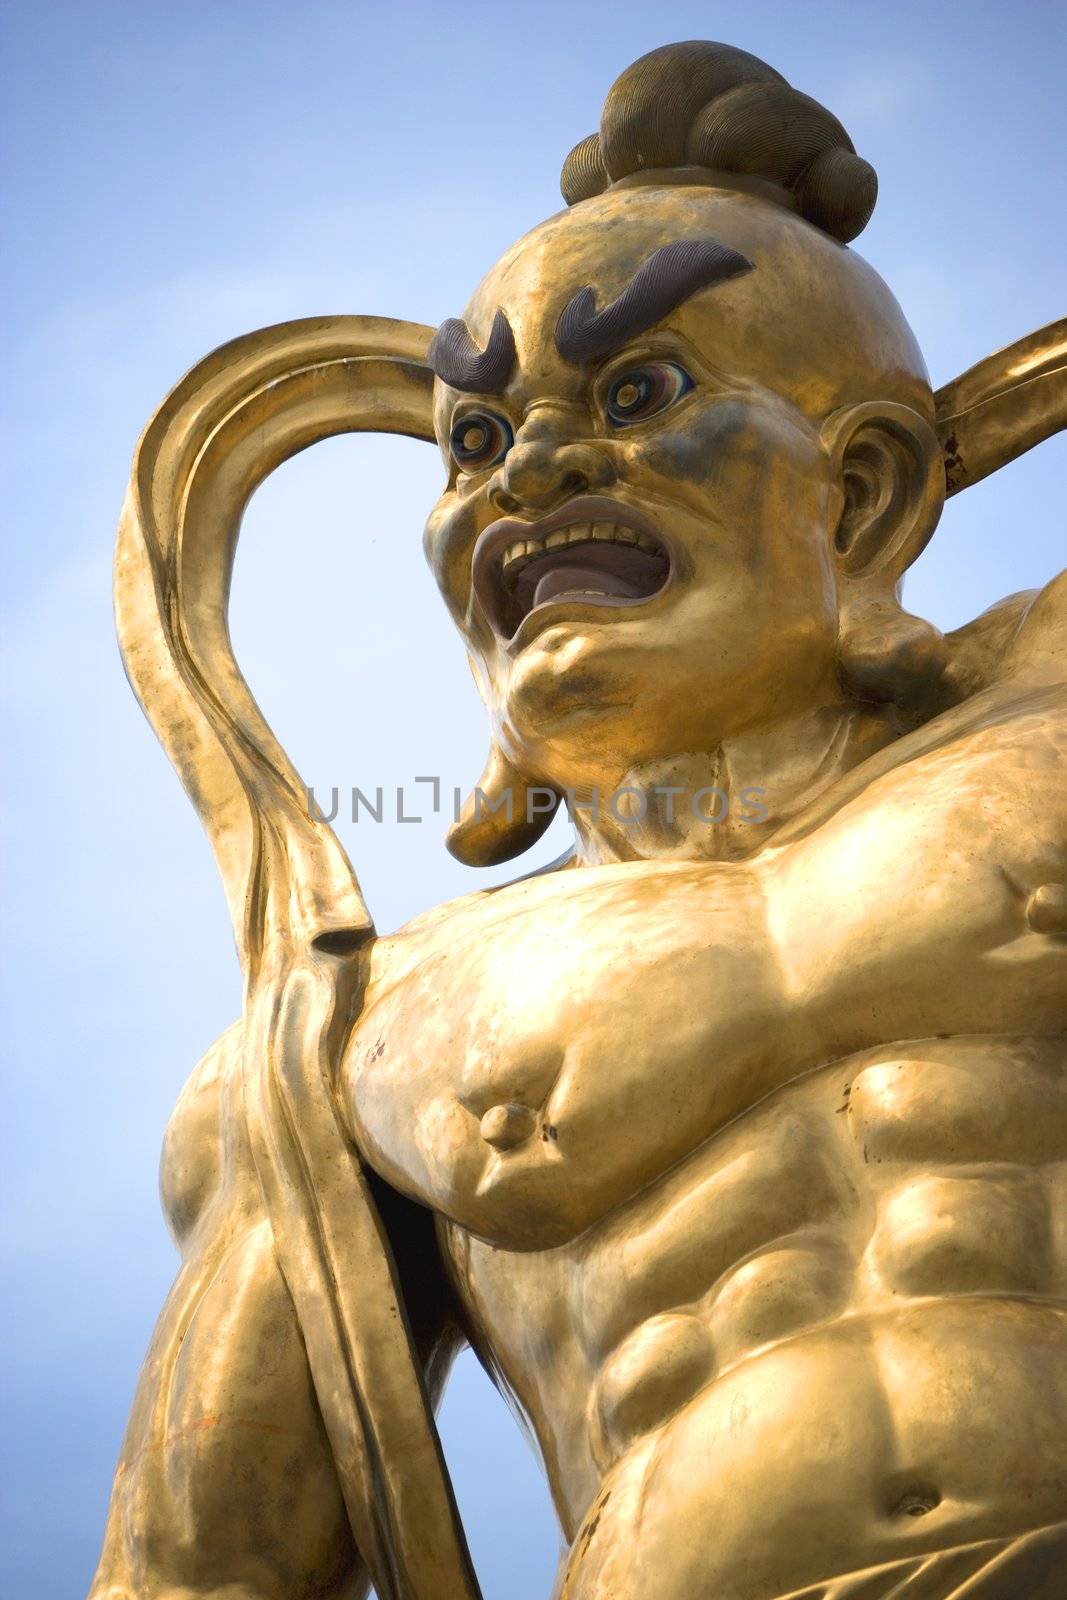 A giant statue of a guardian gurading the entrance to a Chinese temple in Malaysia.